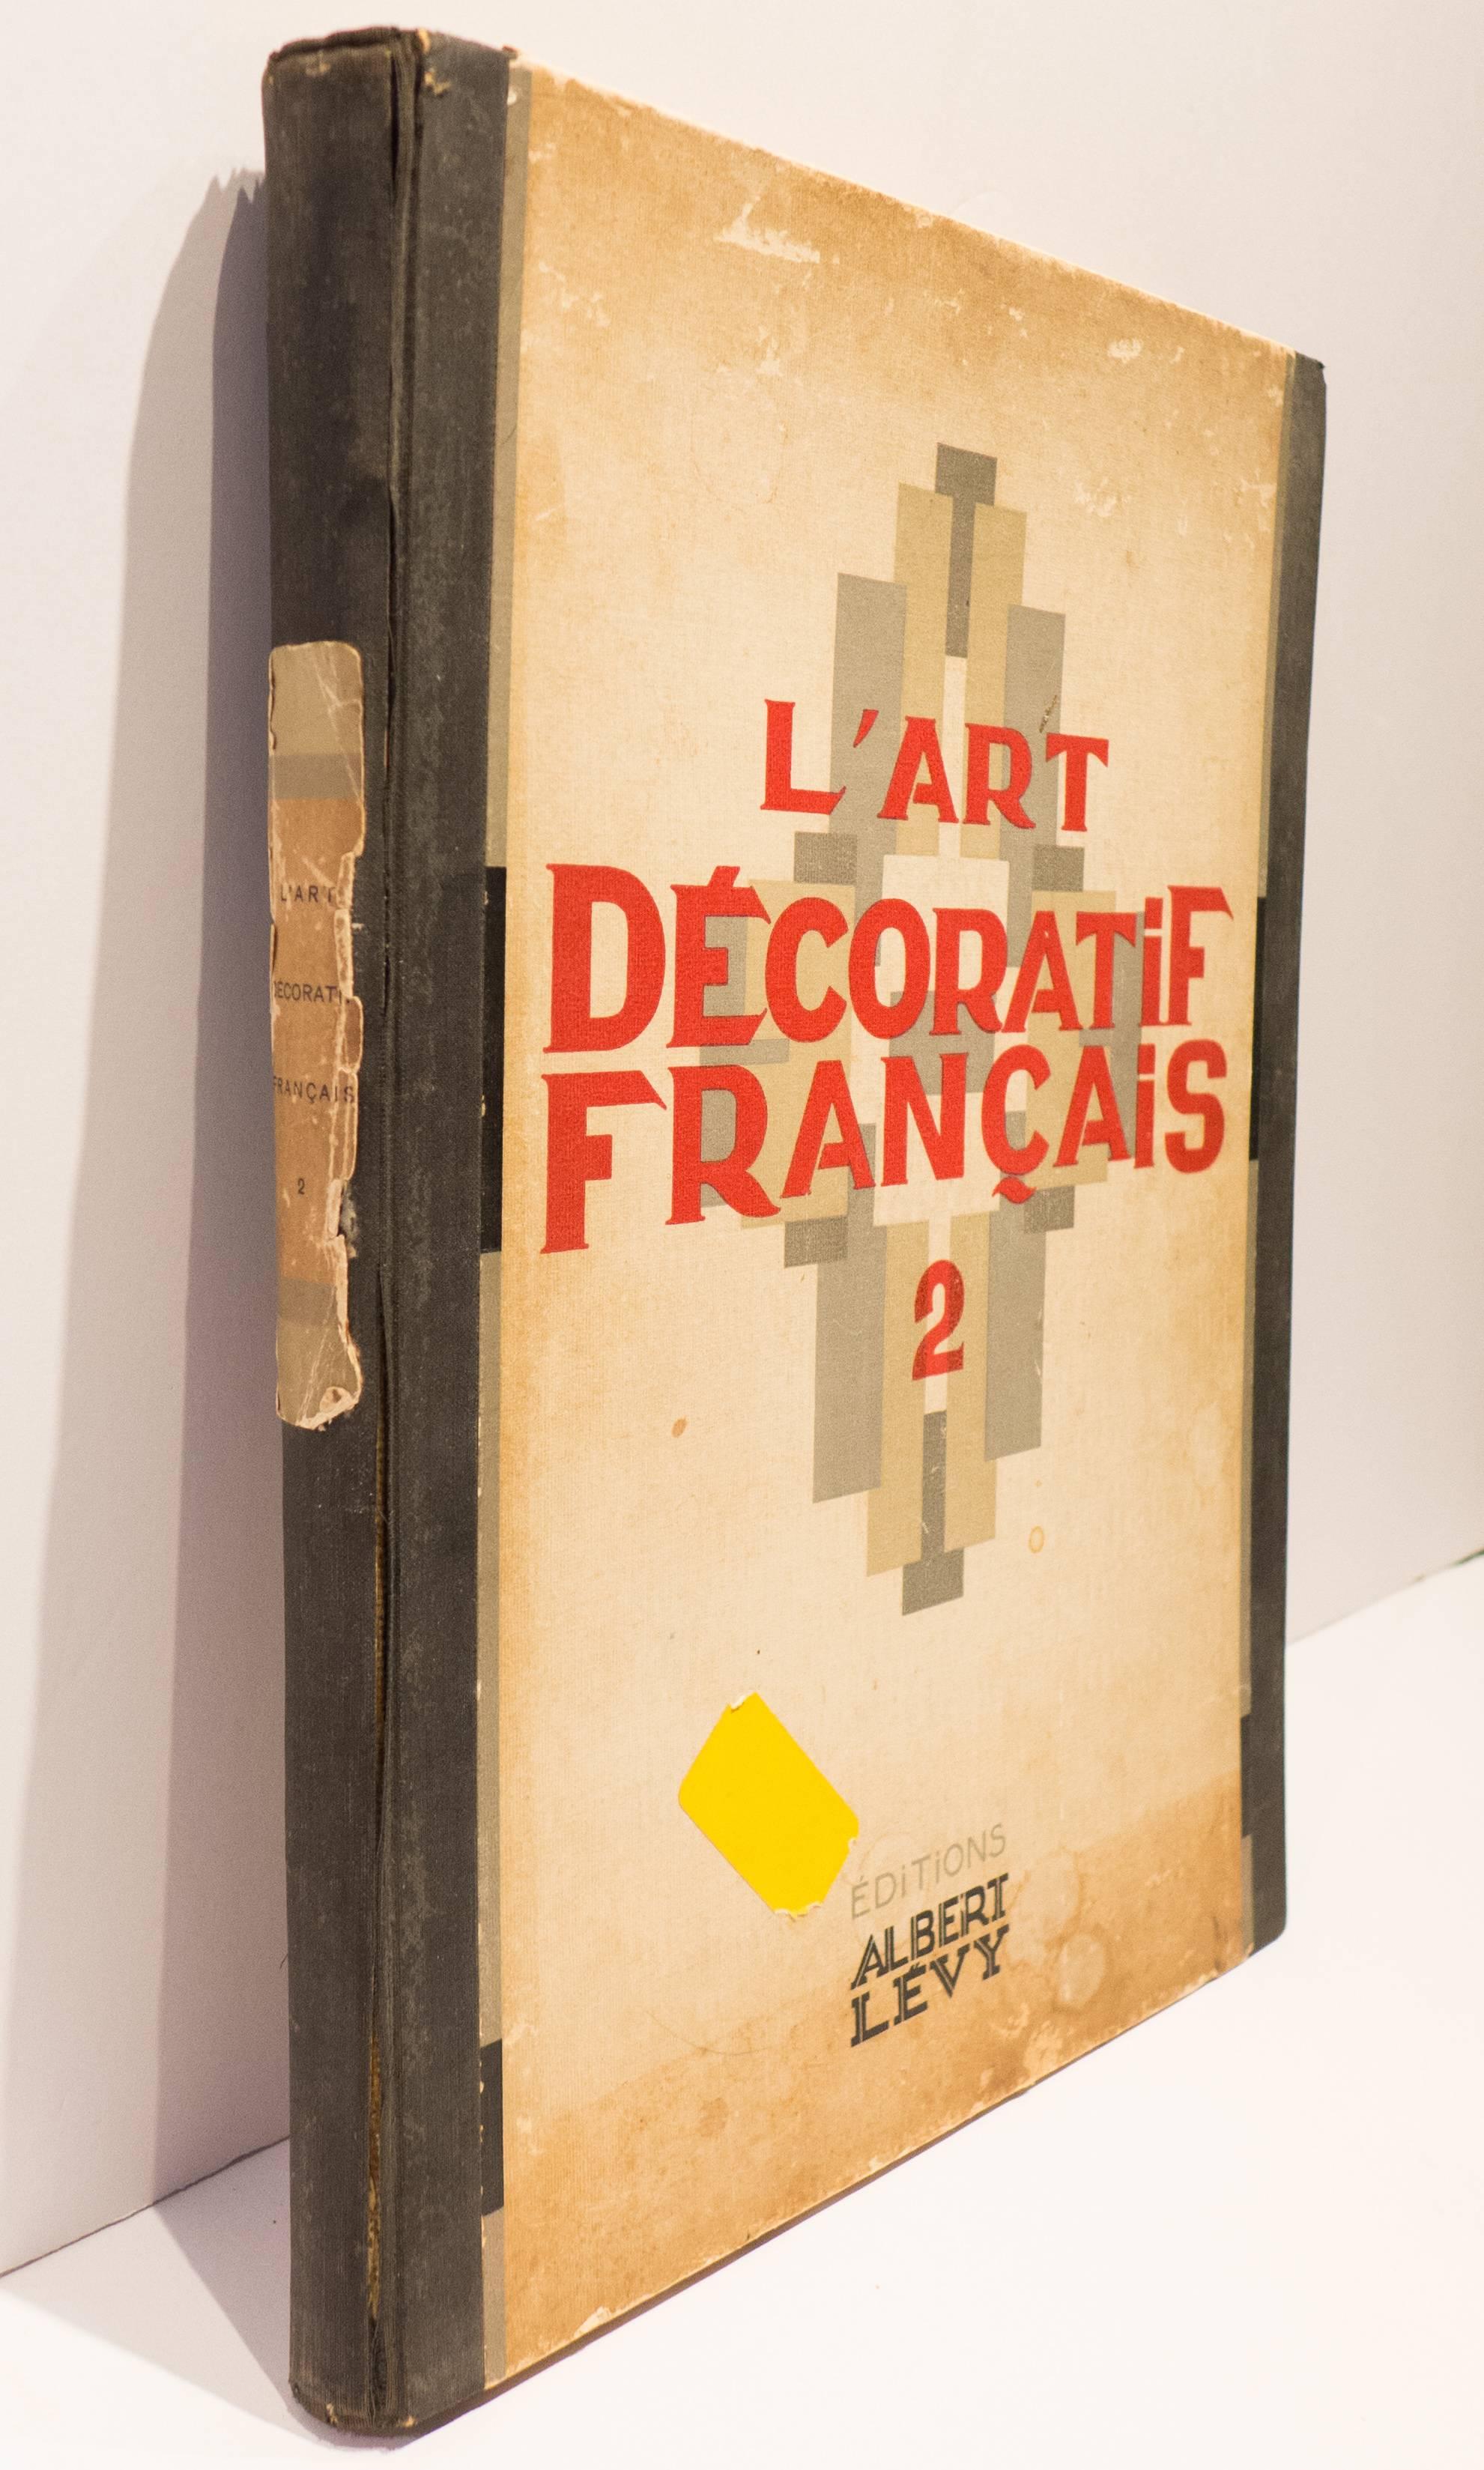 Scarce second volume, deuxieme serie (second series), of this oversized two-volume survey of French decorative arts 1918-1925. This 168 page volume contains hundreds of photographs selected by the editors of "Art et Decoration" magazine in